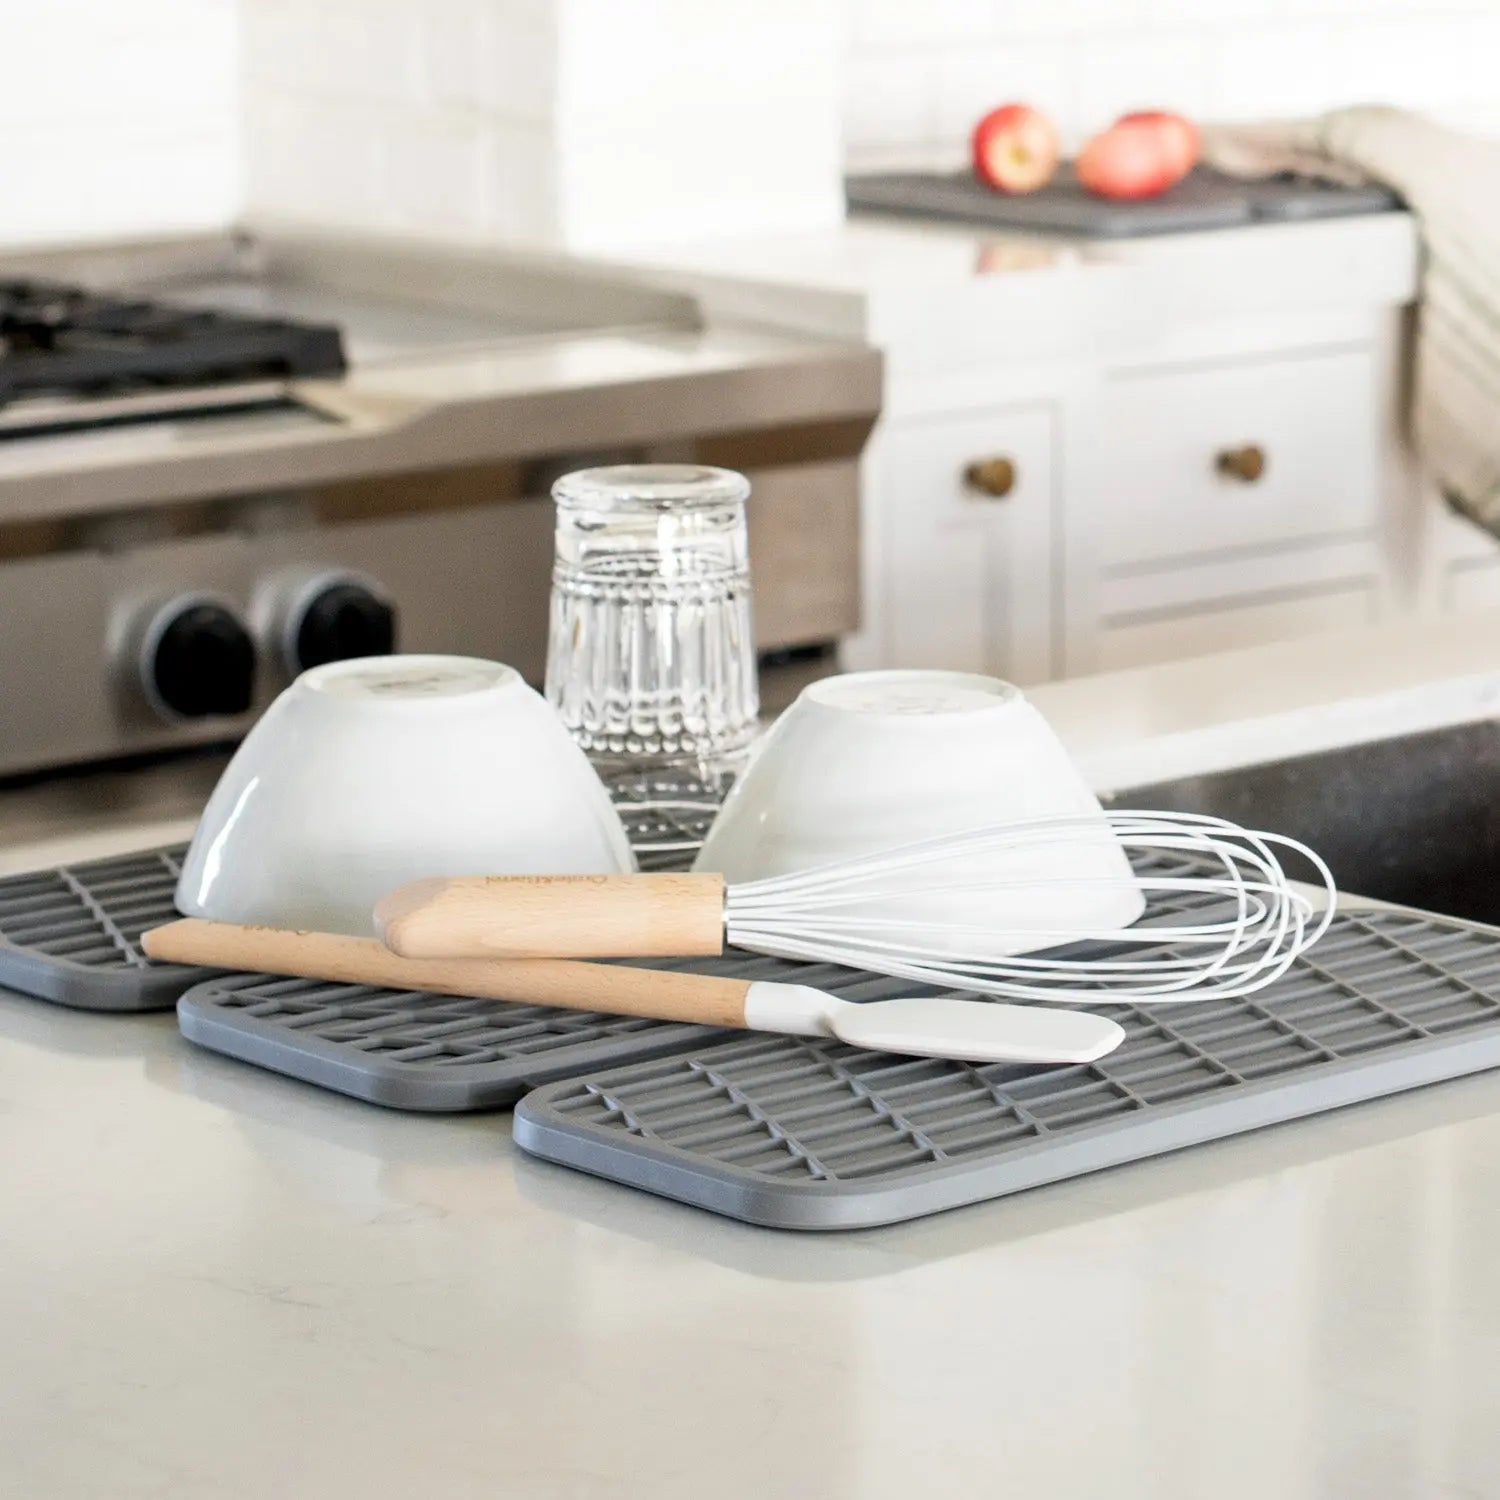 Dish Drying Rack with Mat